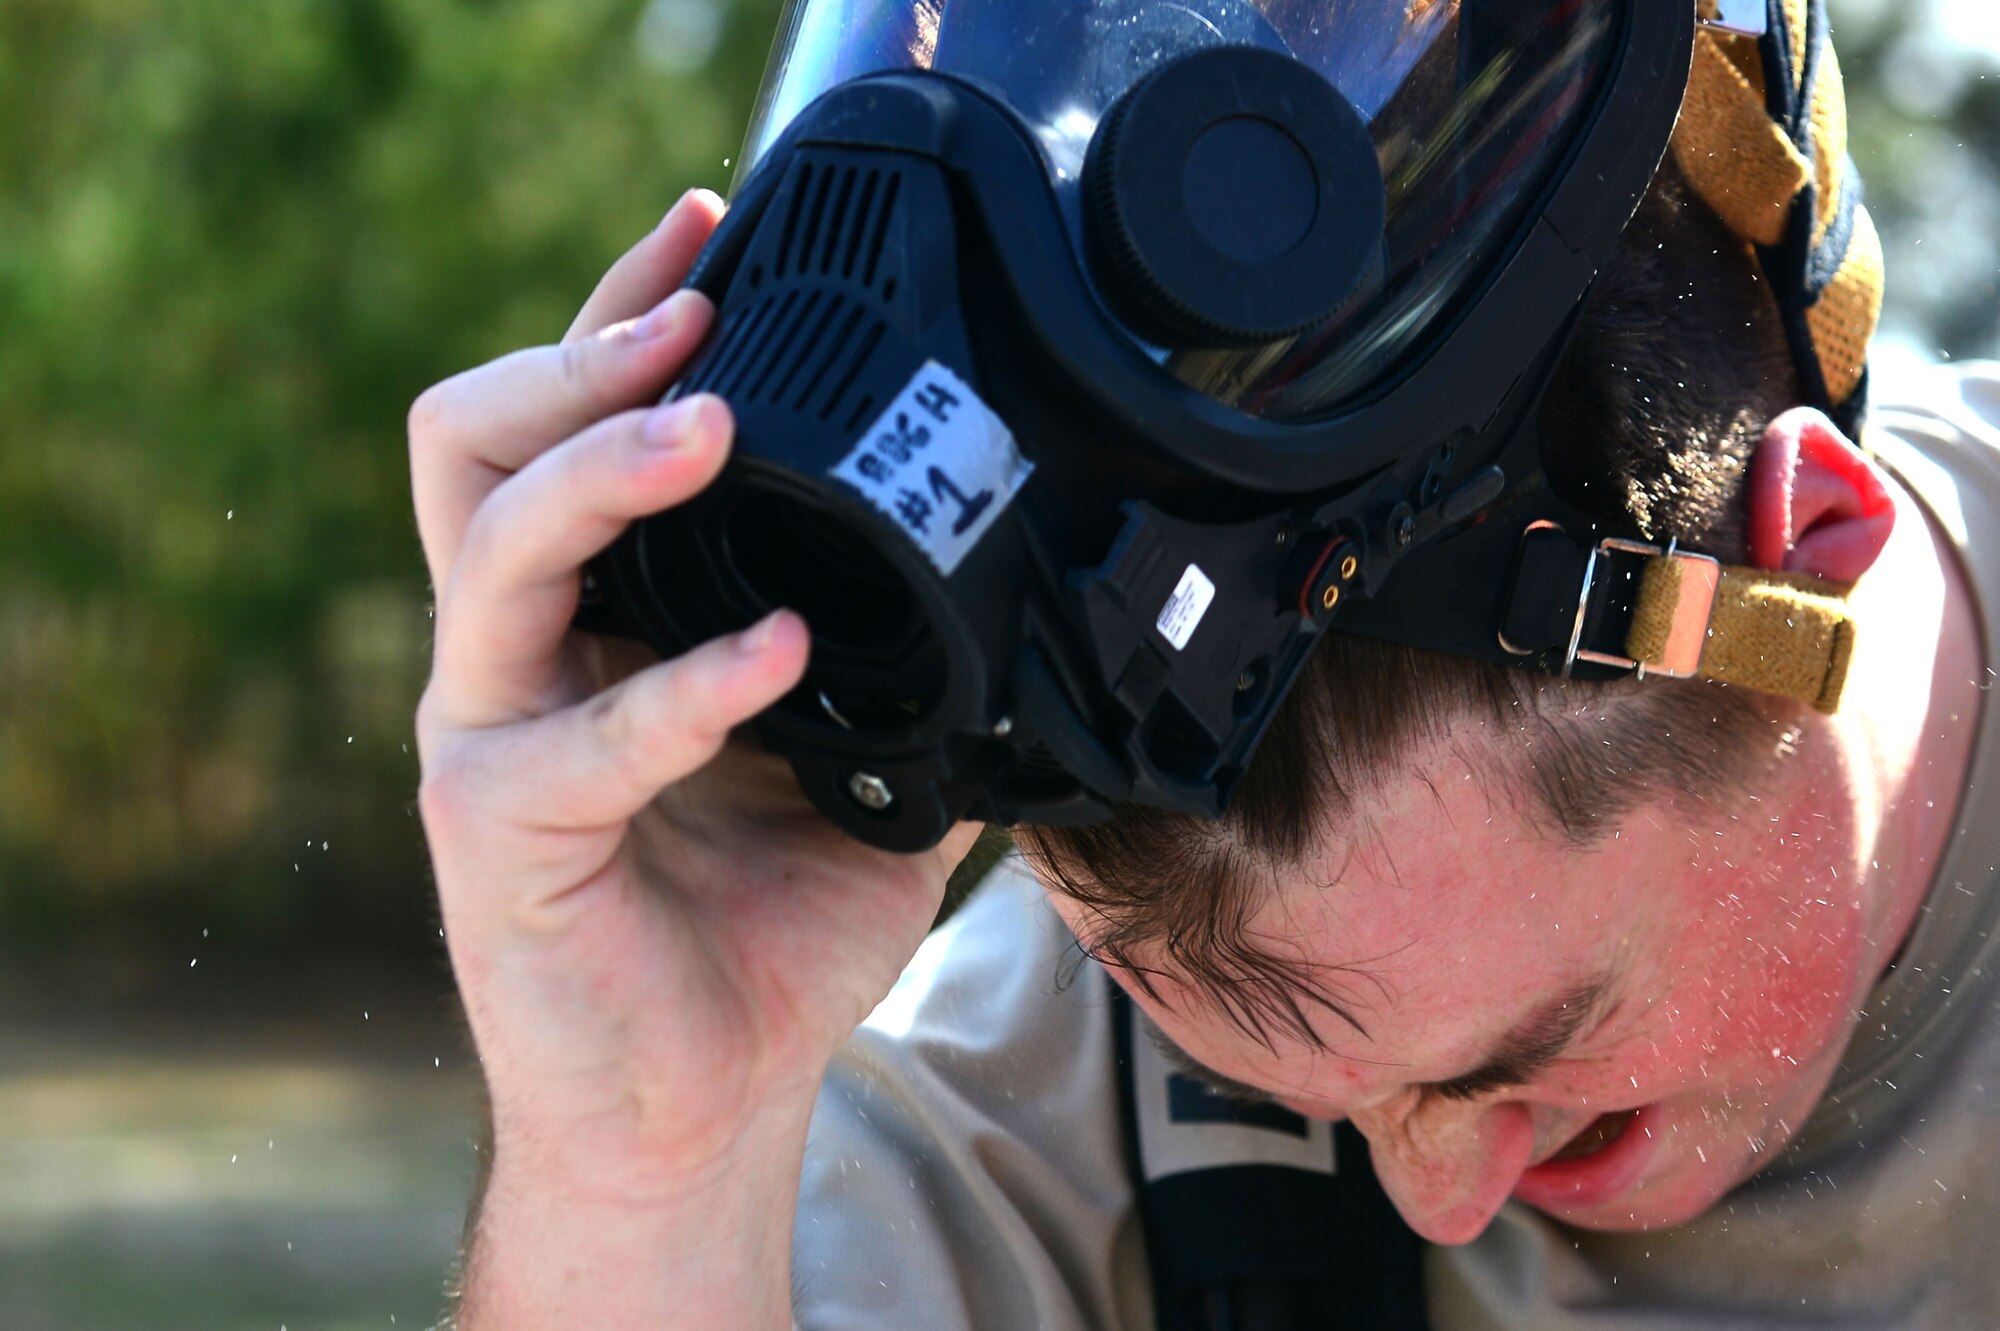 U.S. Air Force Senior Airman Nathan McKee, 20th Aerospace Medicine Squadron bioenvironmental engineer journeyman, removes his respiration device at the conclusion of a hazardous material training (HAZMAT) at Shaw Air Force Base, S.C., Jan. 19, 2017. At the conclusion of the training, participating Airmen went through a decontamination line and removed all HAZMAT gear. (U.S. Air Force photo by Airman 1st Class Christopher Maldonado)